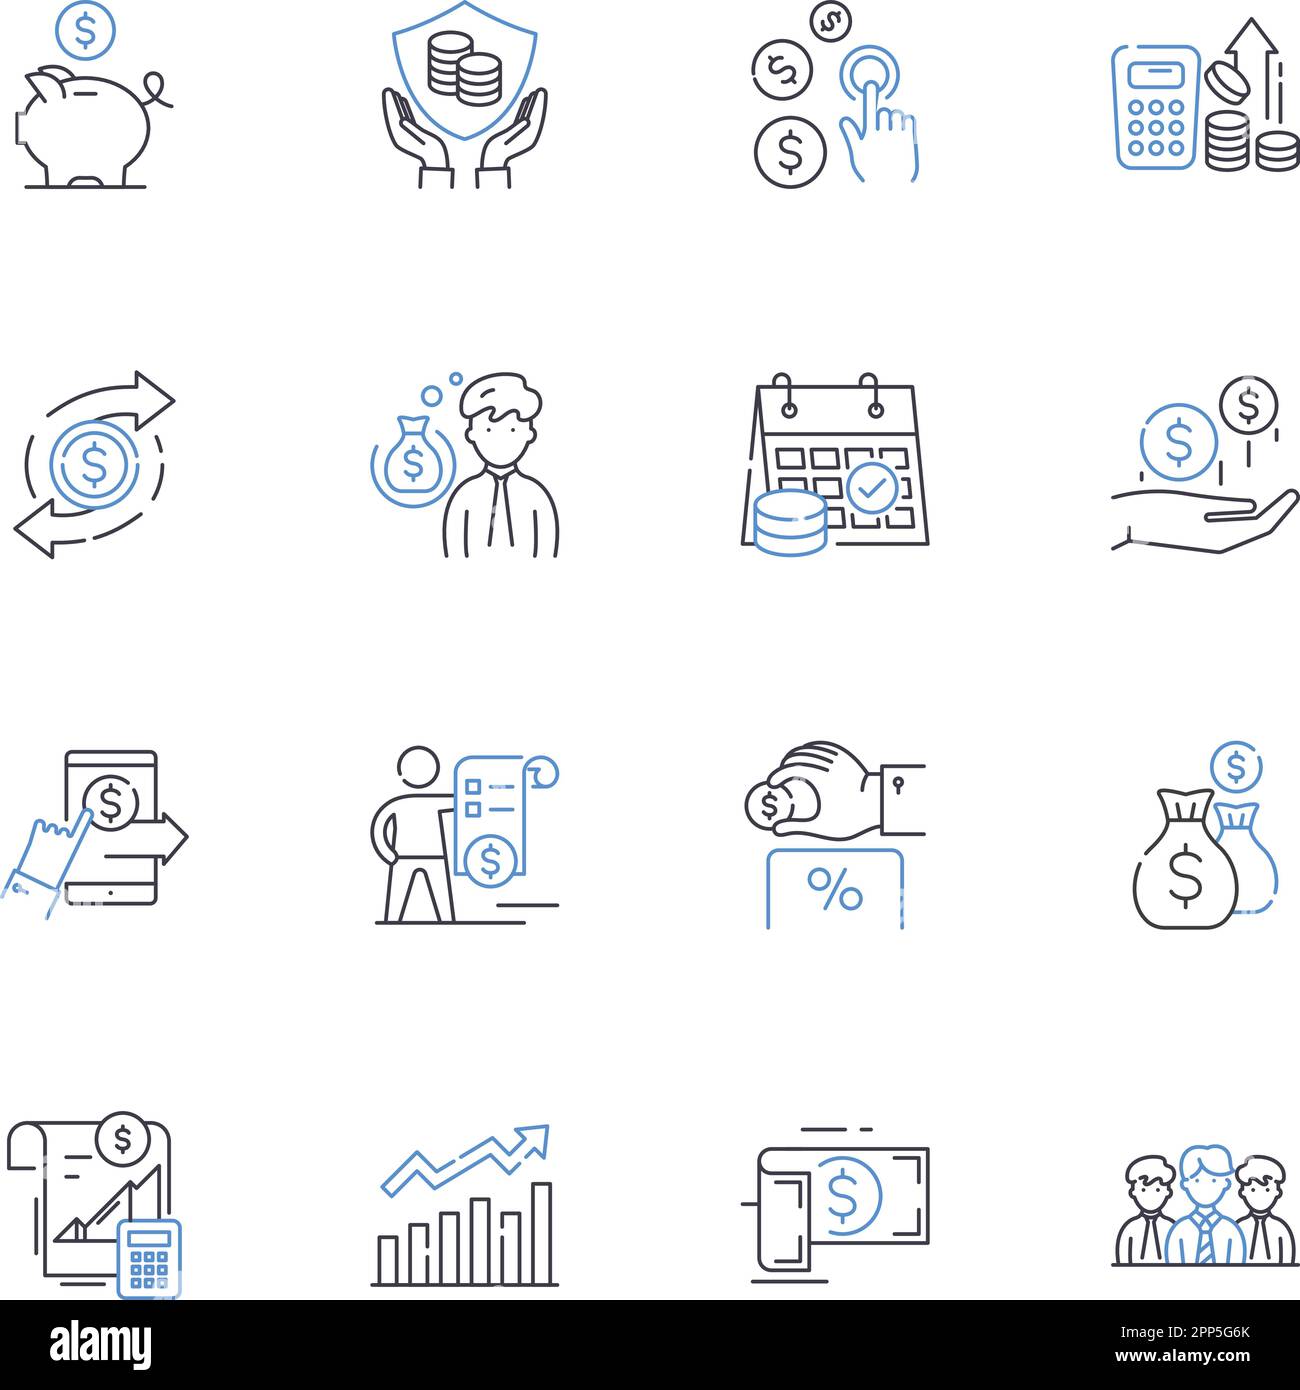 Credit management line icons collection. Debt, Credirthiness, Interest, Loan, Credit score, Credit limit, Payment vector and linear illustration Stock Vector